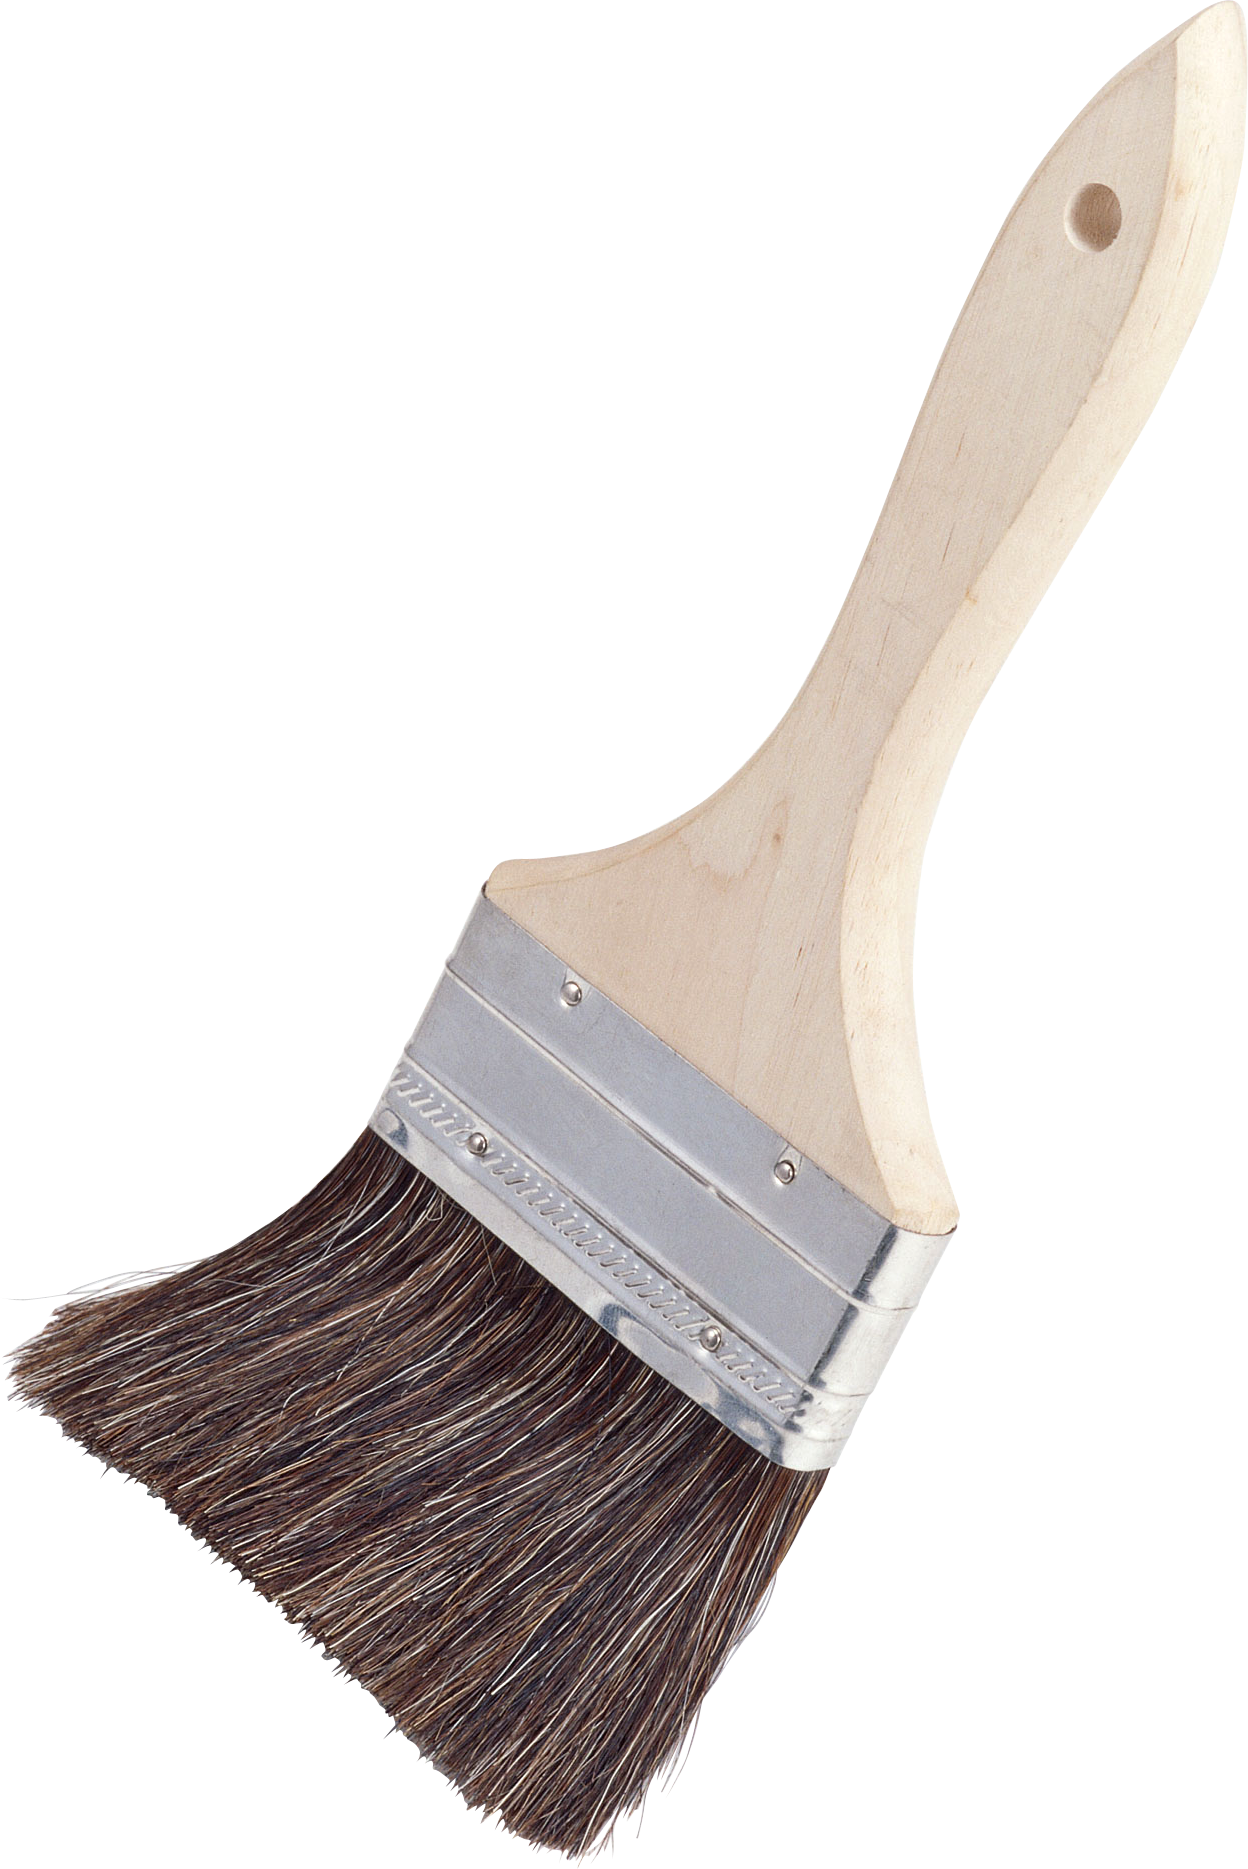 Used Paint Brushes (PNG Transparent)